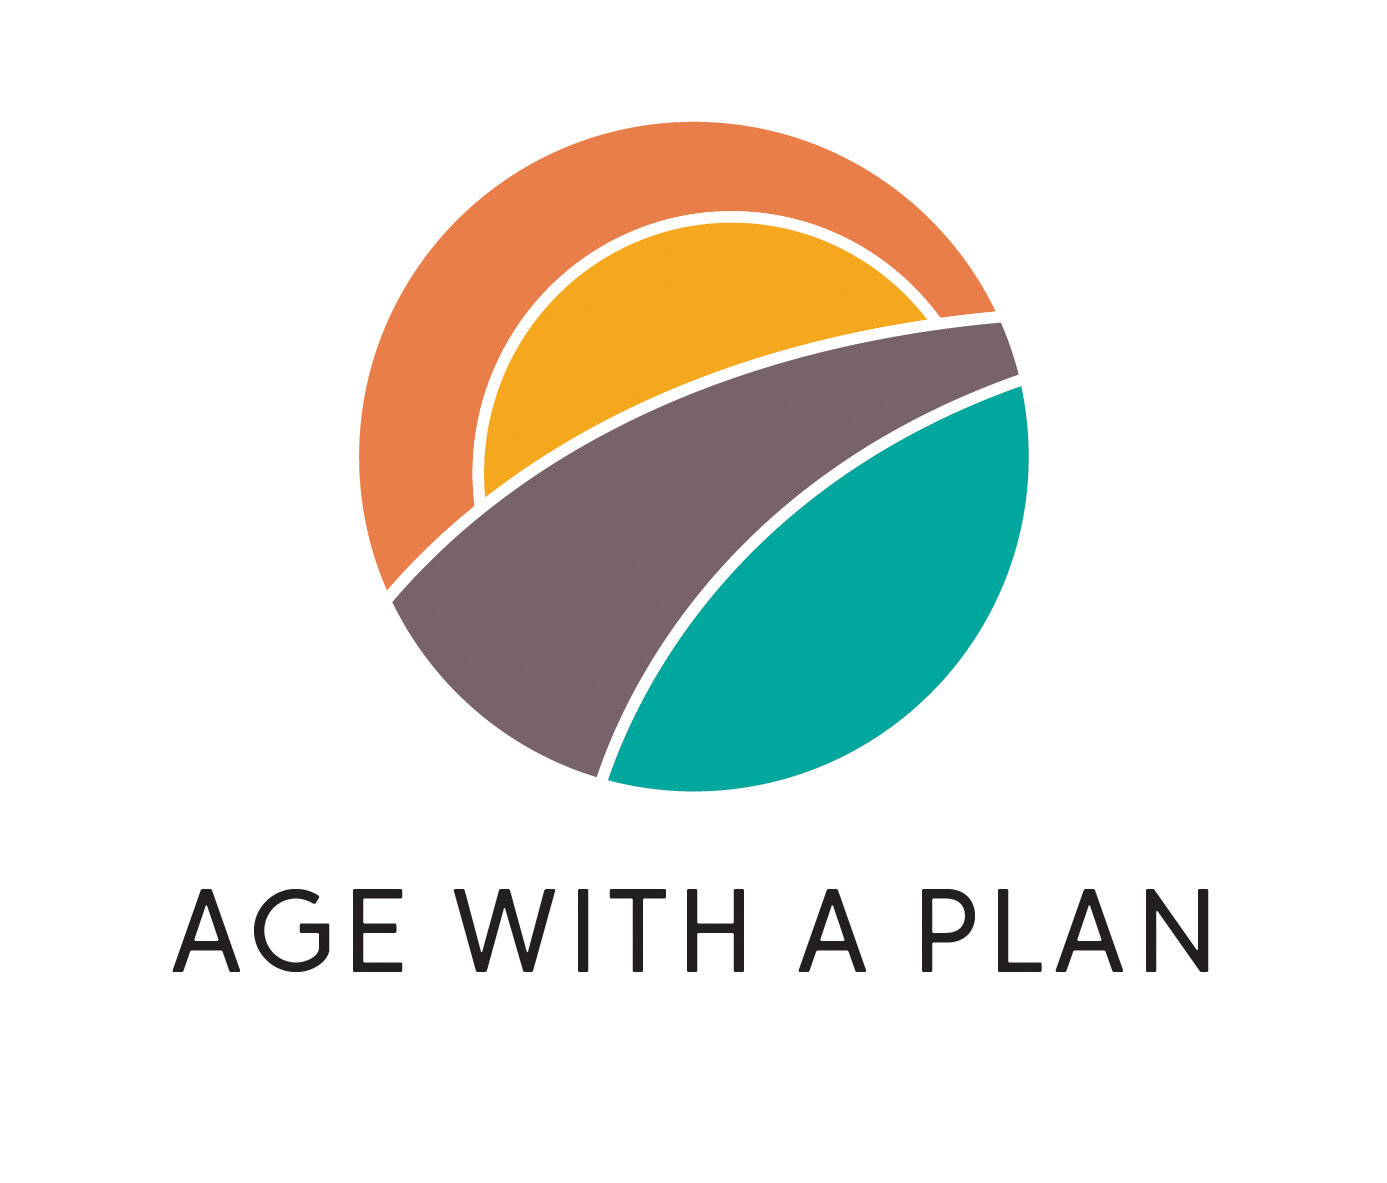 Age with a plan